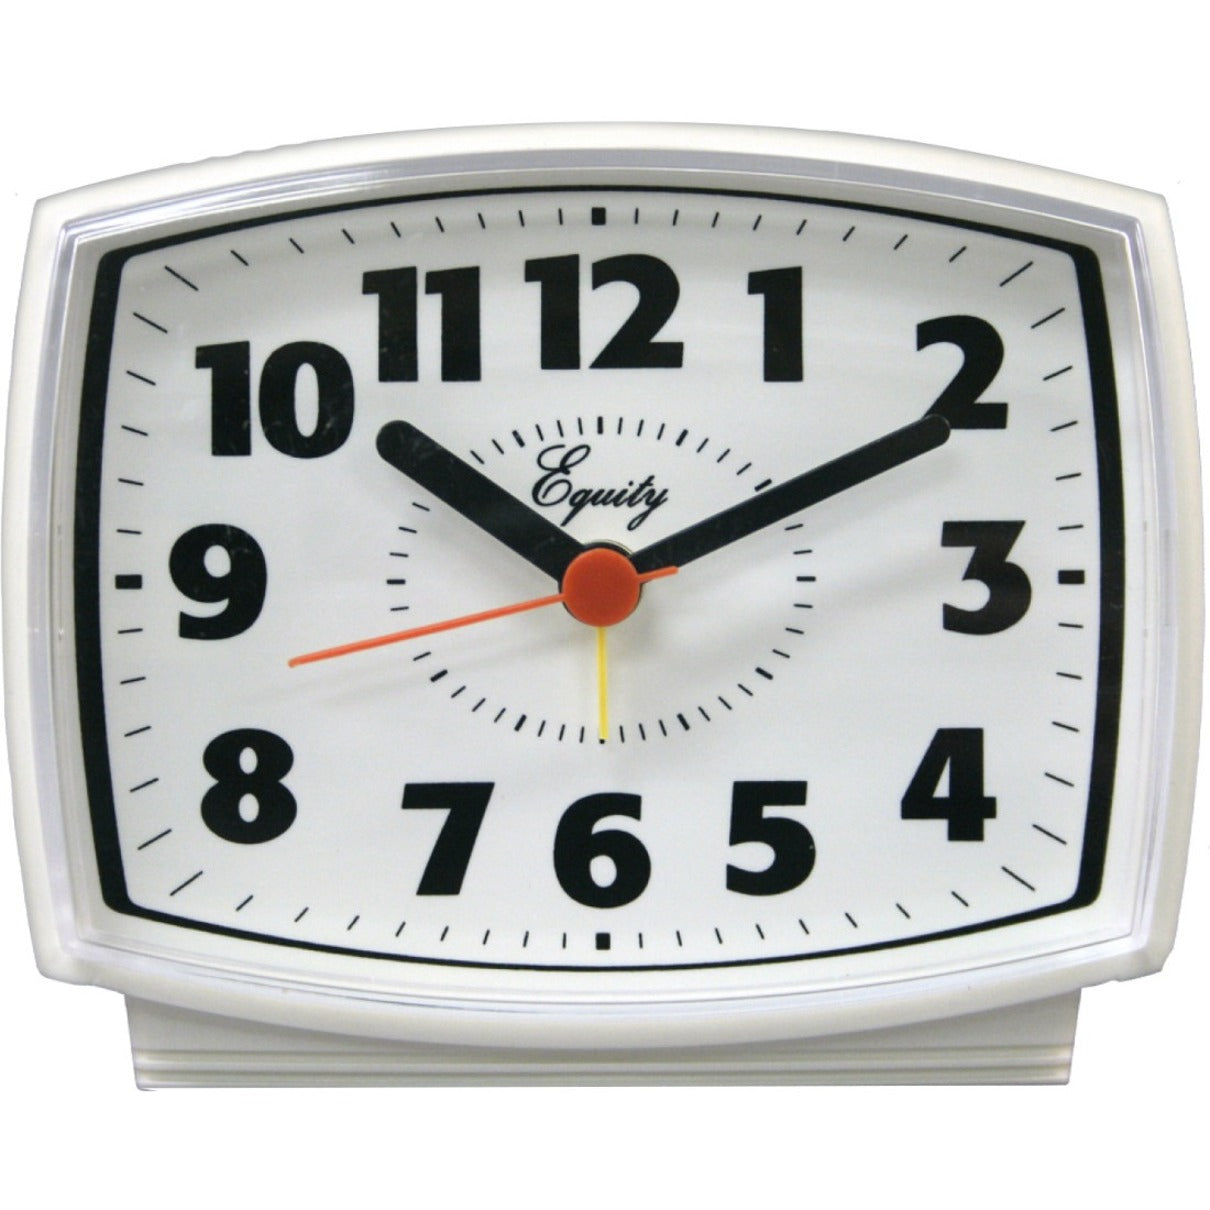 La Crosse Technology 33100 Electric Analog Alarm Clock, White Rectangle Table Clock with Alarm and Snooze